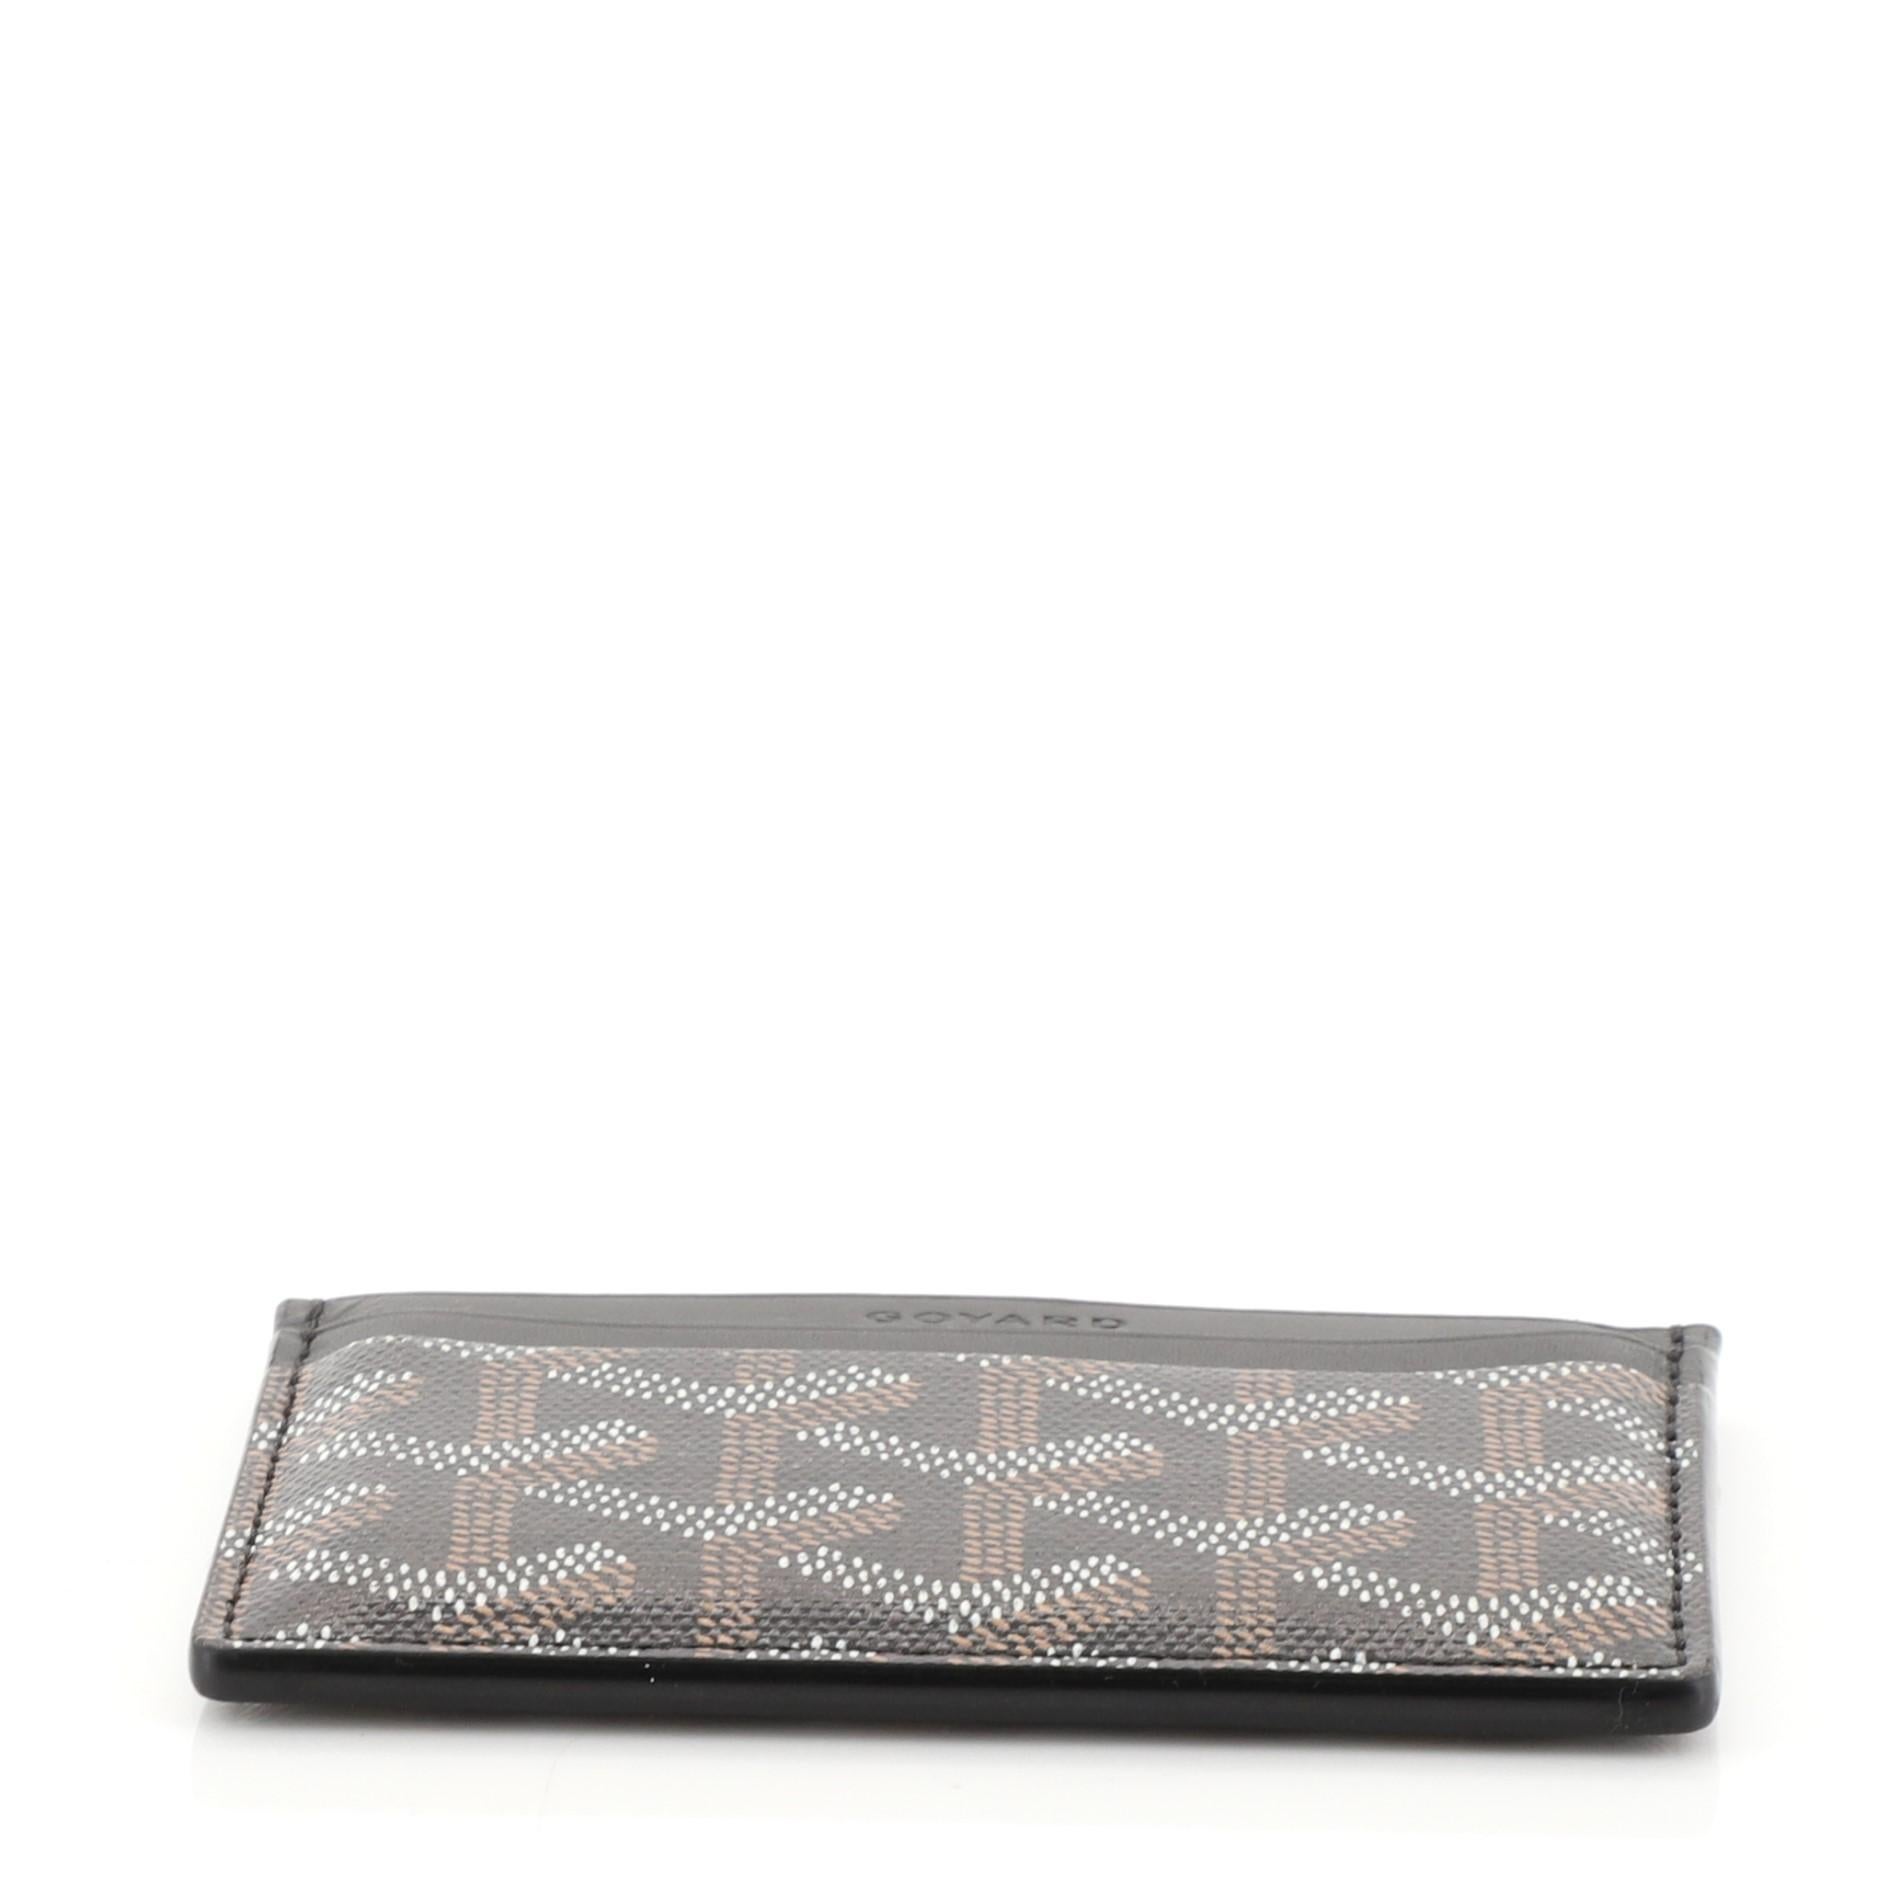 saint-sulpice card wallet price